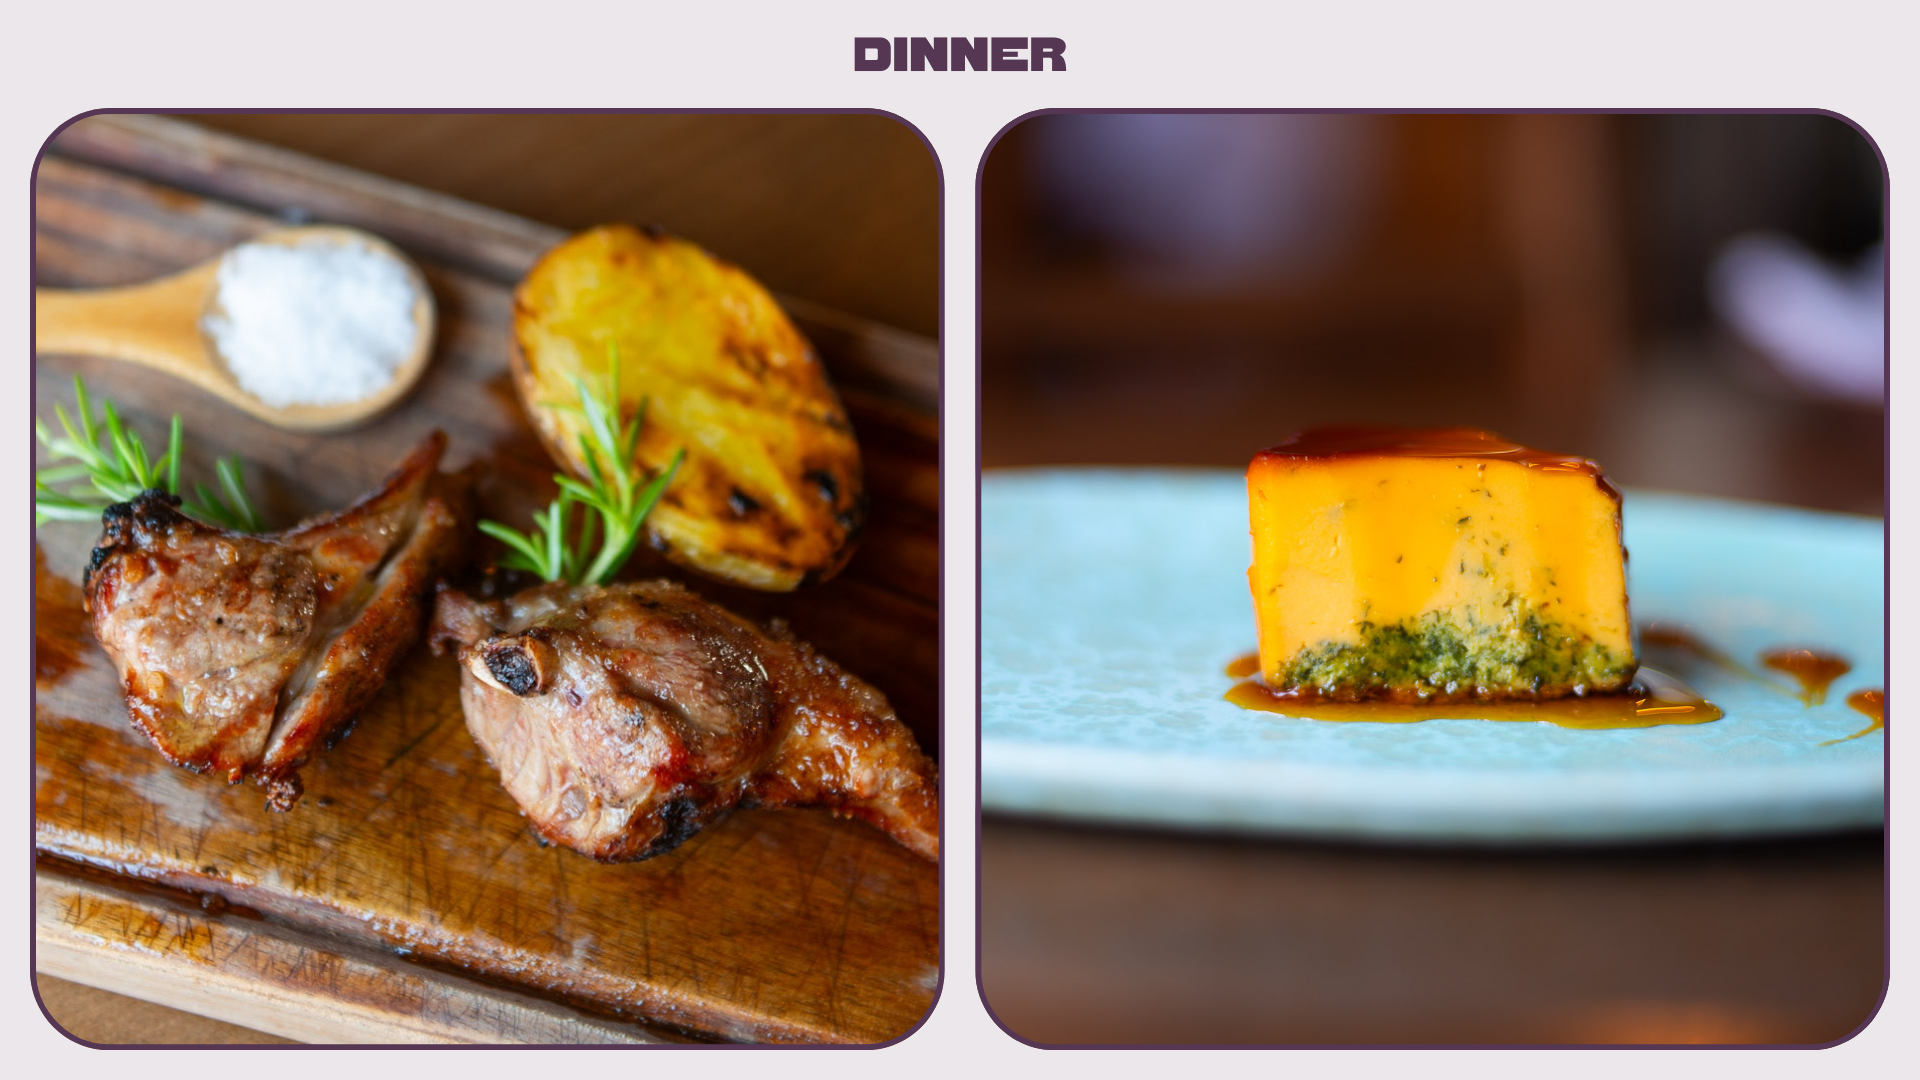 L: A plate of grilled lamb and fried potatoes. R: A Portuguese dessert that looks like flan